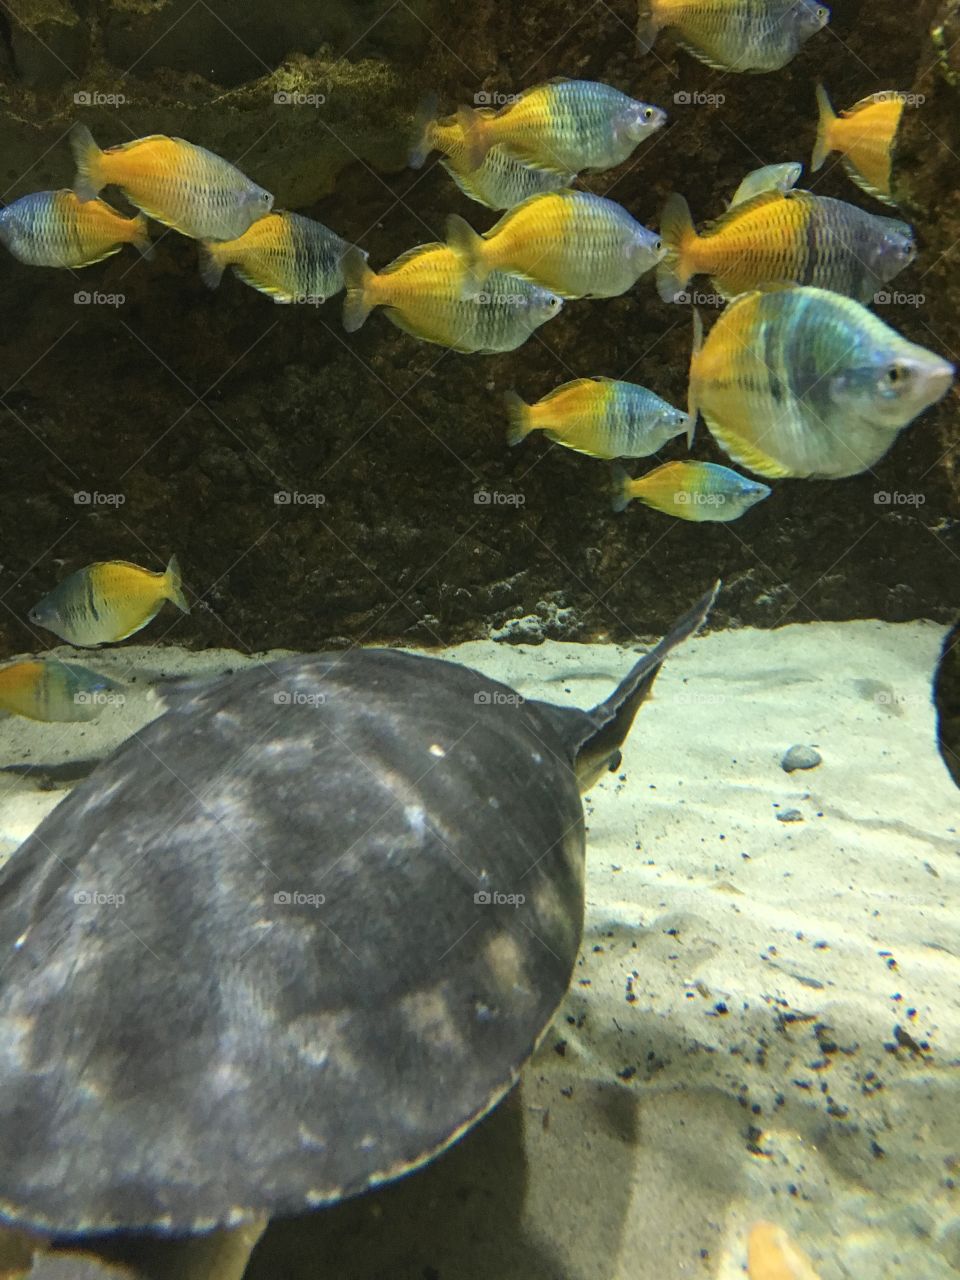 Turtle and fish